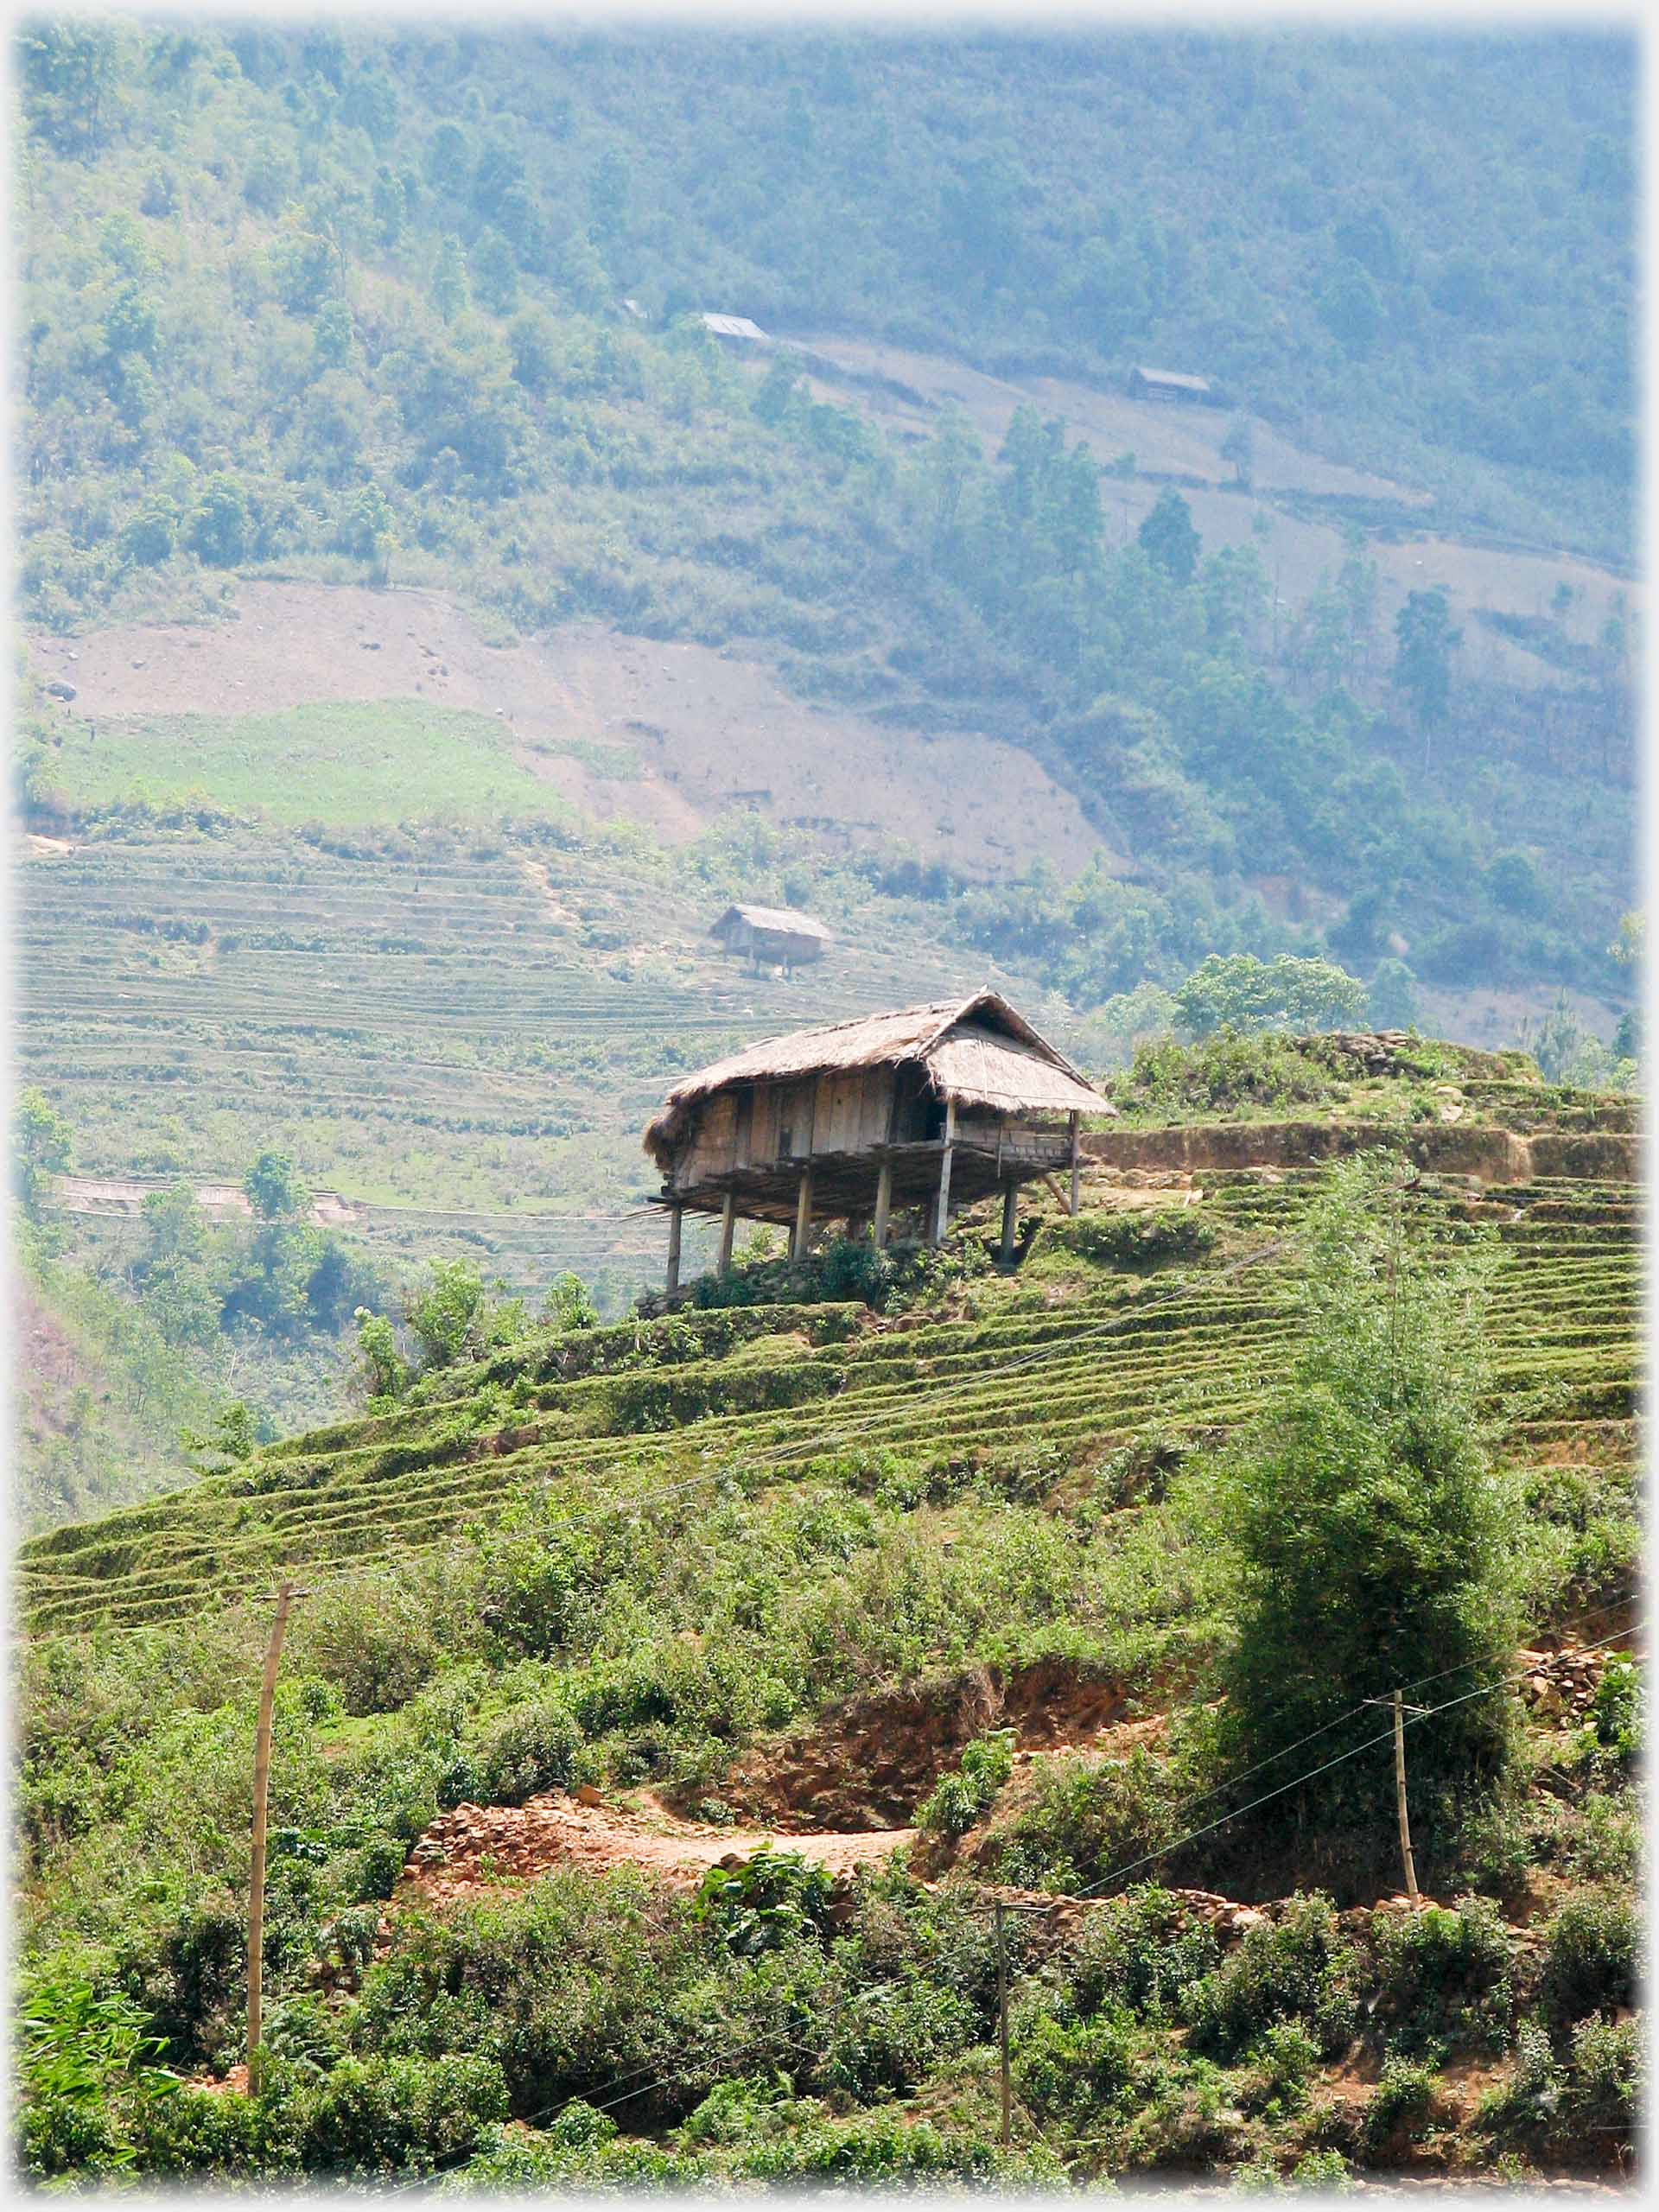 Stilt house perched on terraces, more on mountainside beyond.